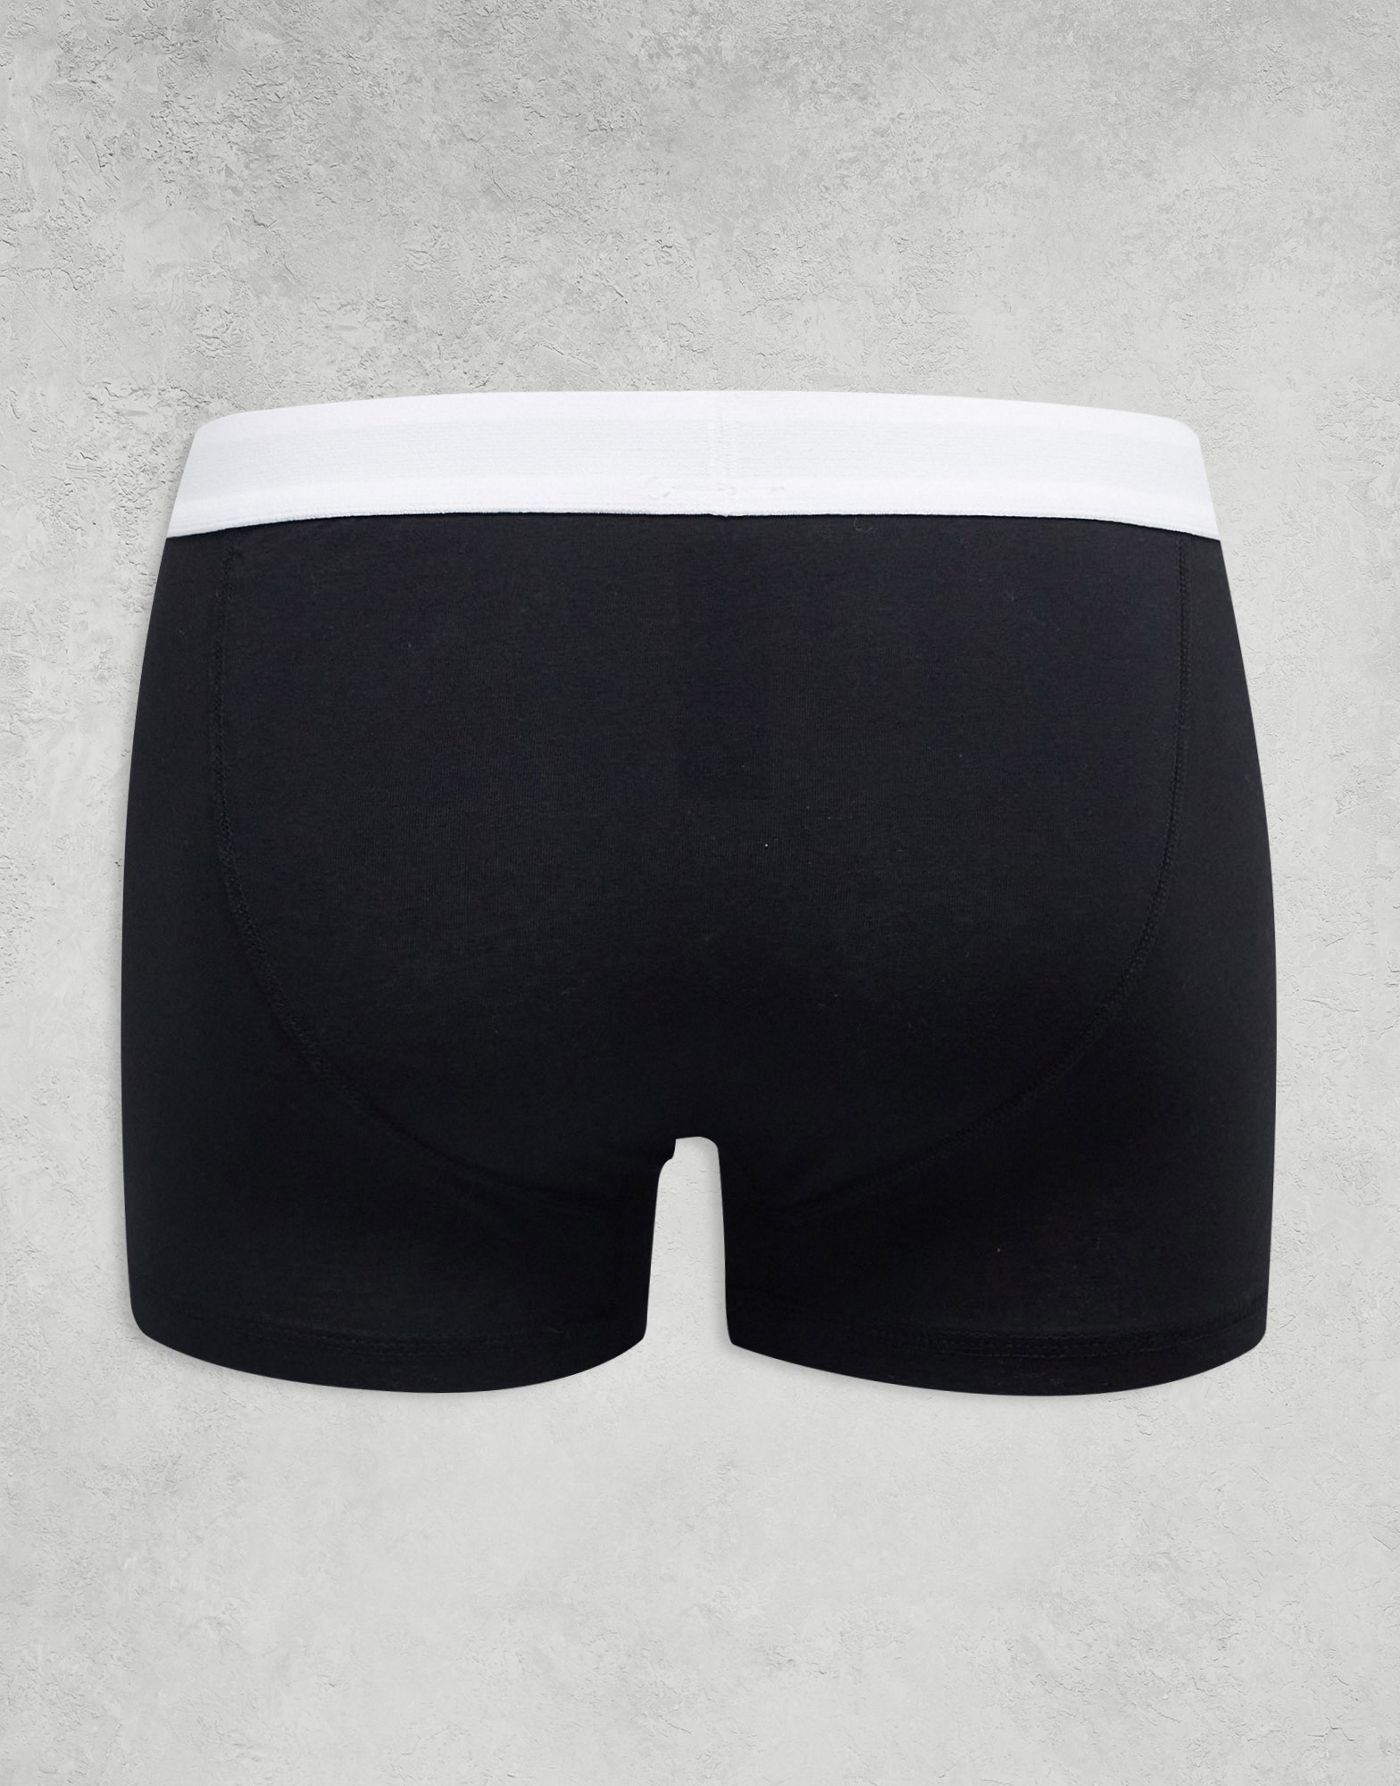 Topman 3 pack trunks in black, white and red